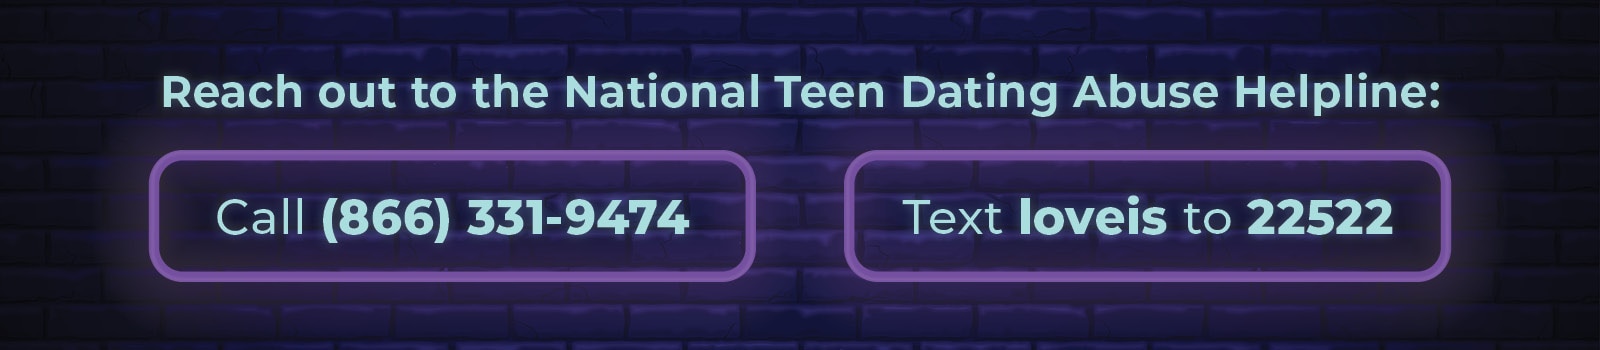 Reach out to the National Teen Dating Abuse Helpline. Call: (866) 331-9474 or text: loveis to 22522